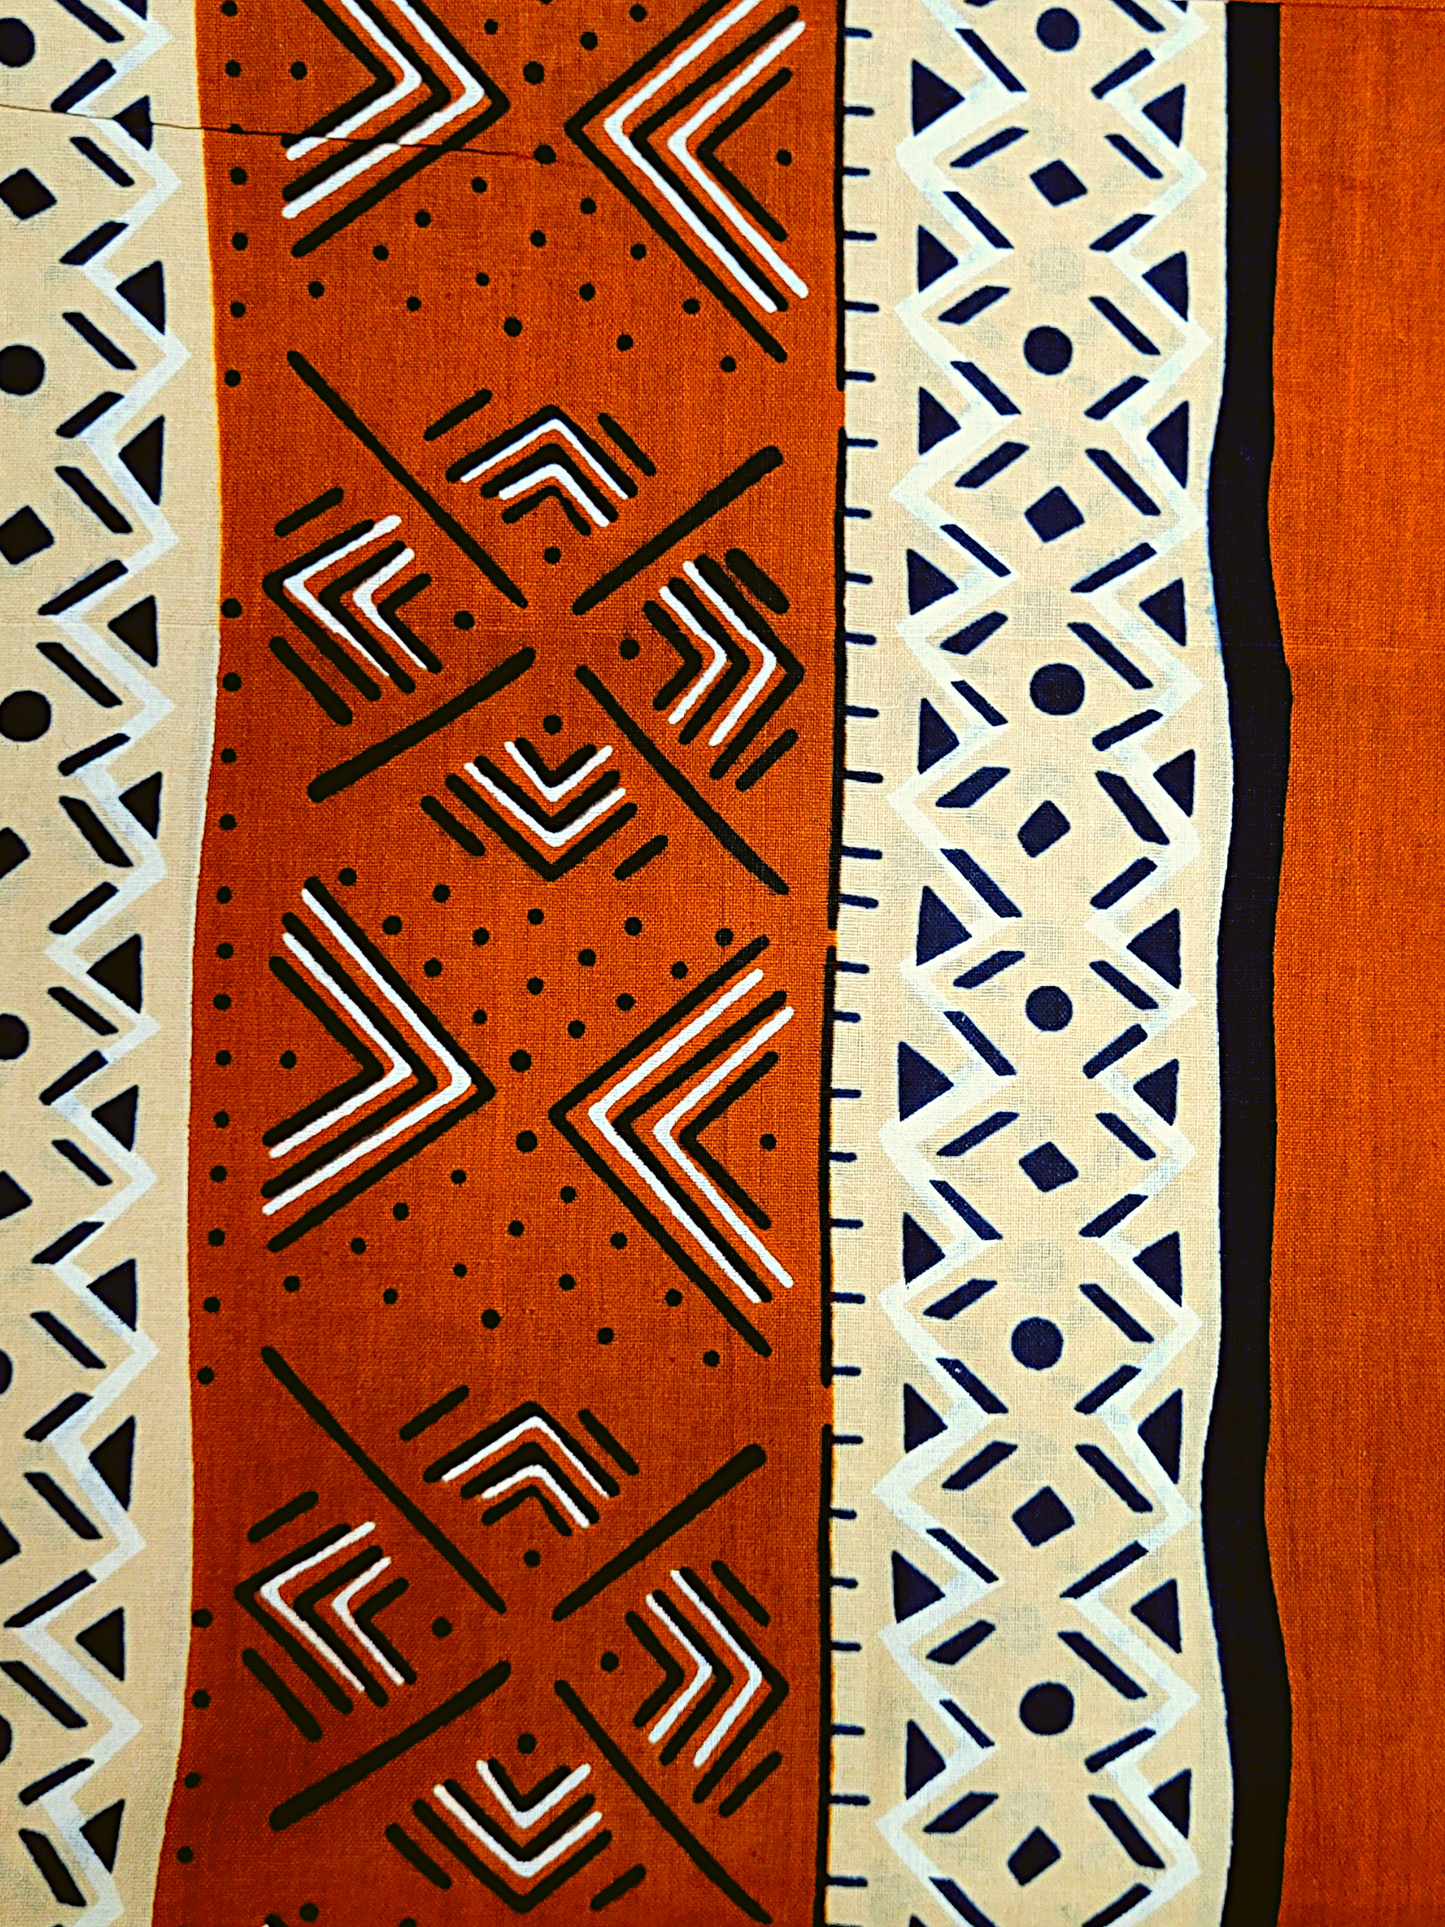 African Fabrics By the Yard - Mudcloth Print - Rustic Brown, Off White, and Black